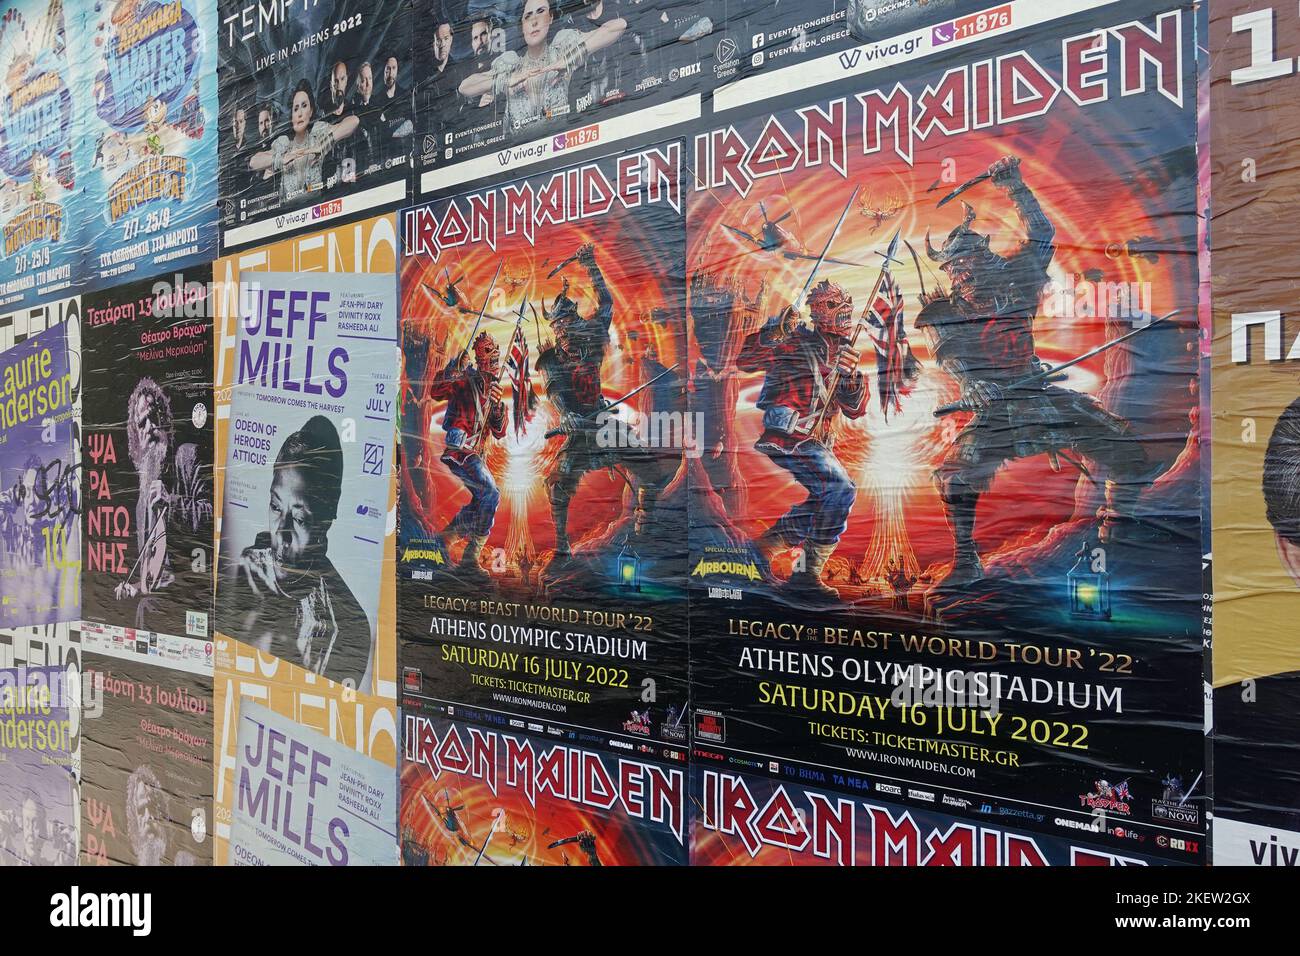 Athens, Greece - July 11, 2022: Concert posters street adverts for live music events. Stock Photo